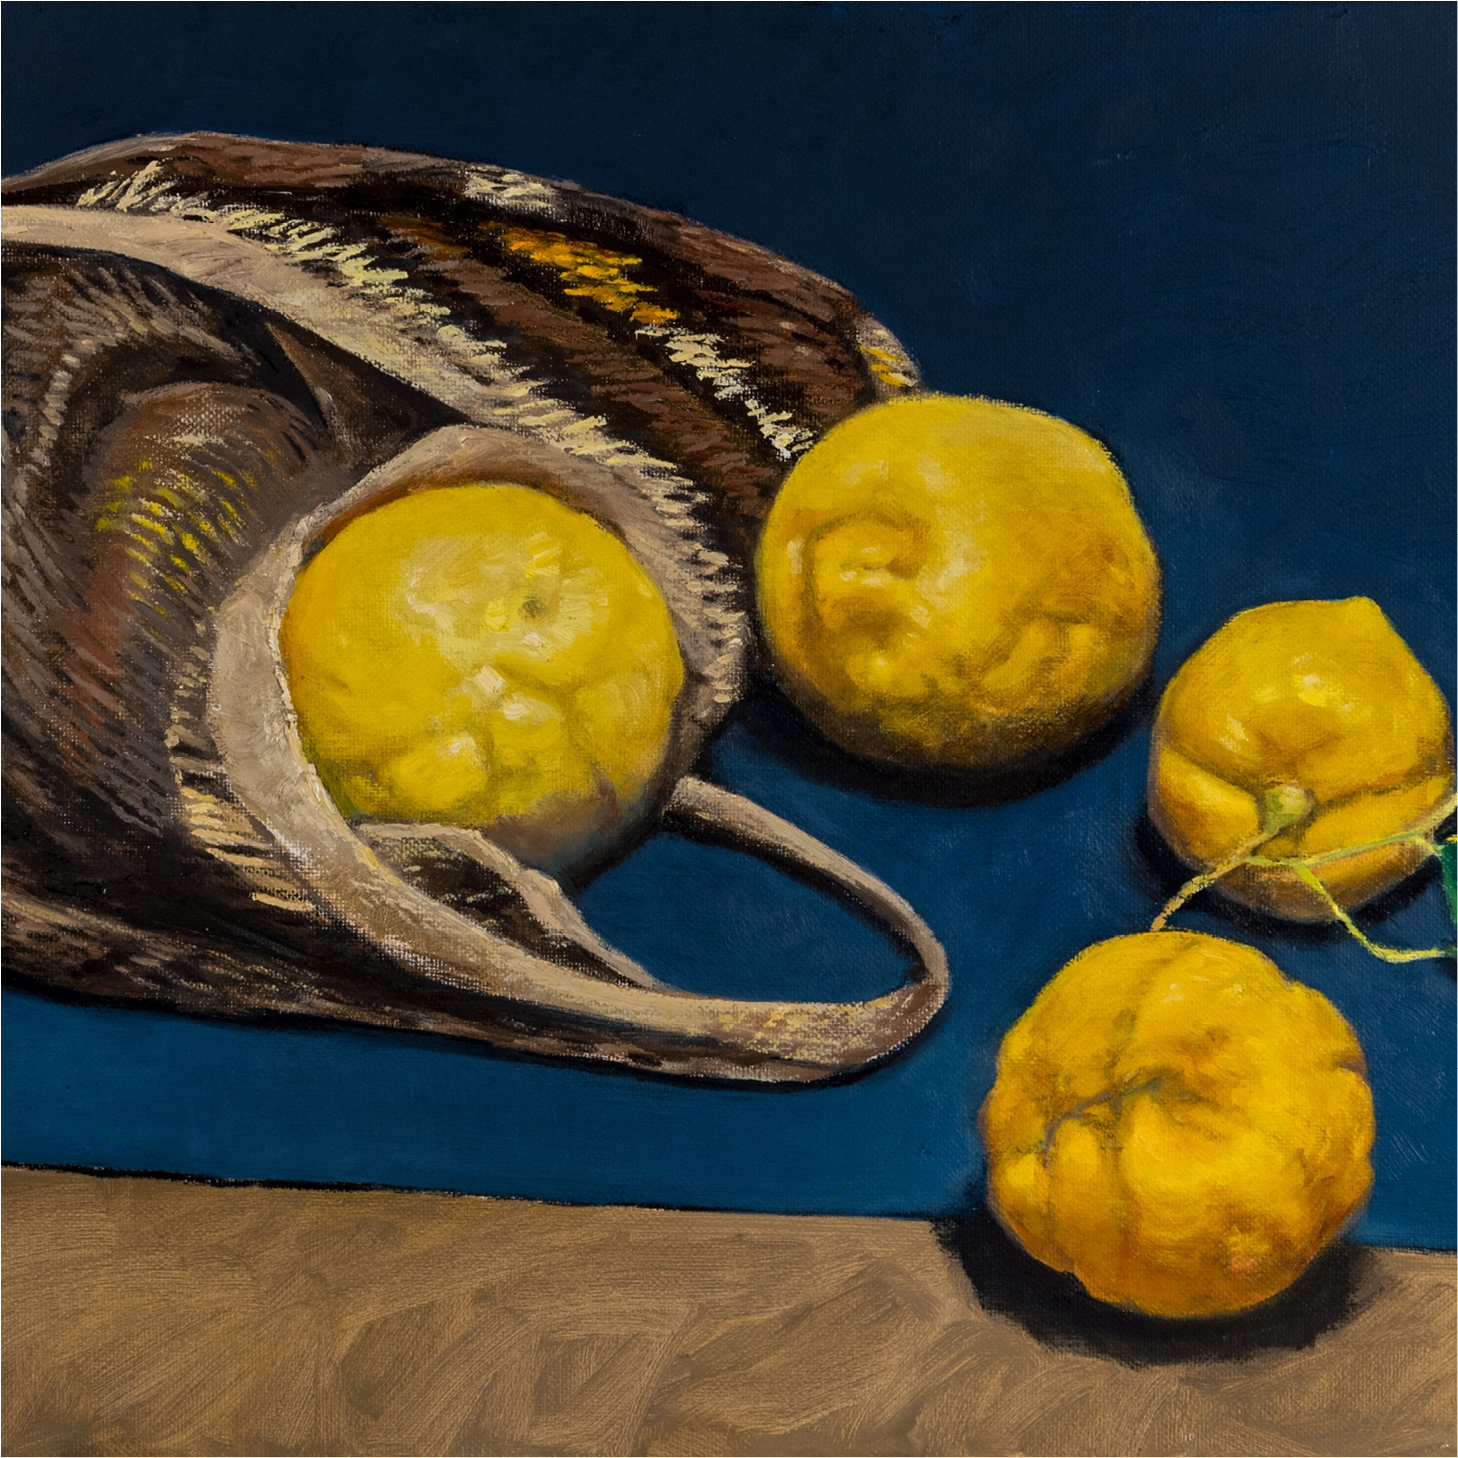 Unlemon &ndash; a meandering tale of citrus by Alison Mitchell